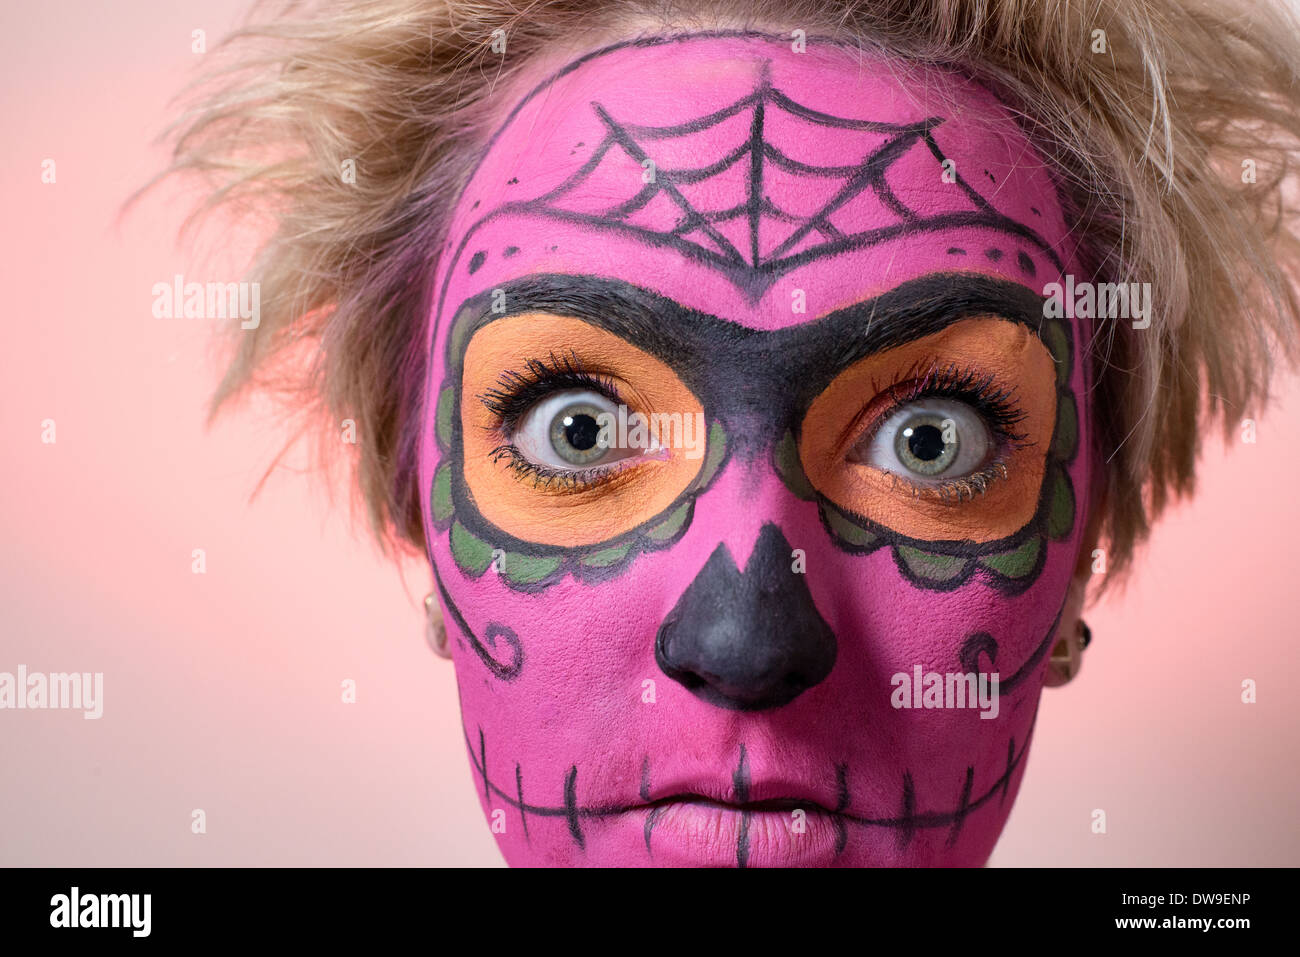 Close-up shot of a young woman with zombie style face paint in pink and wild hair striking a horror pose for the camera. Stock Photo